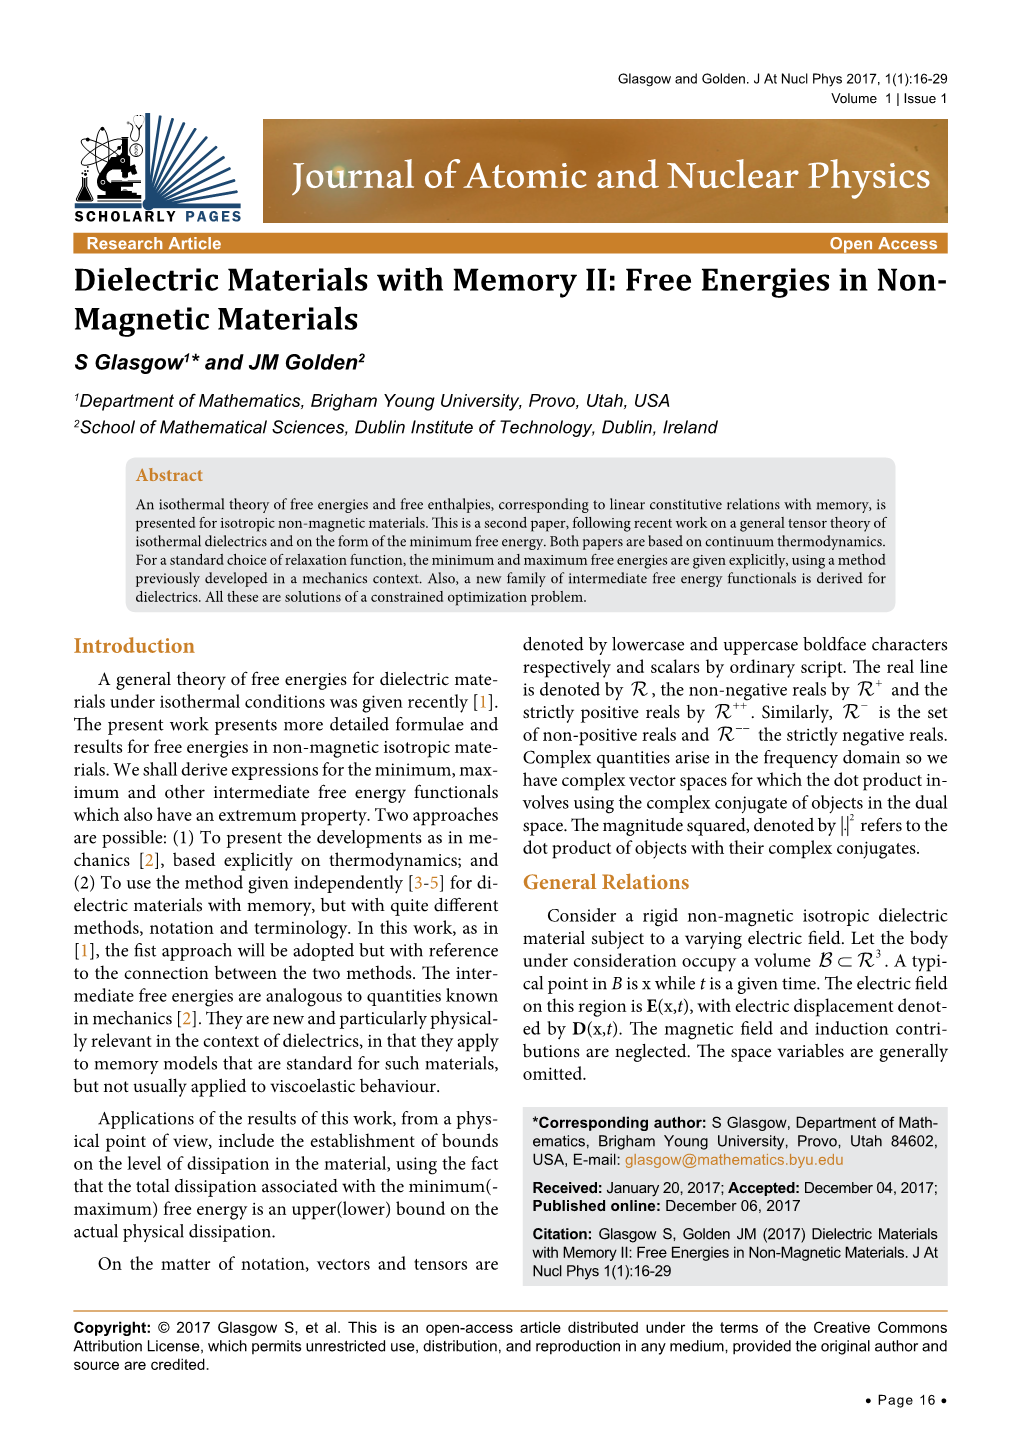 Dielectric Materials with Memory II